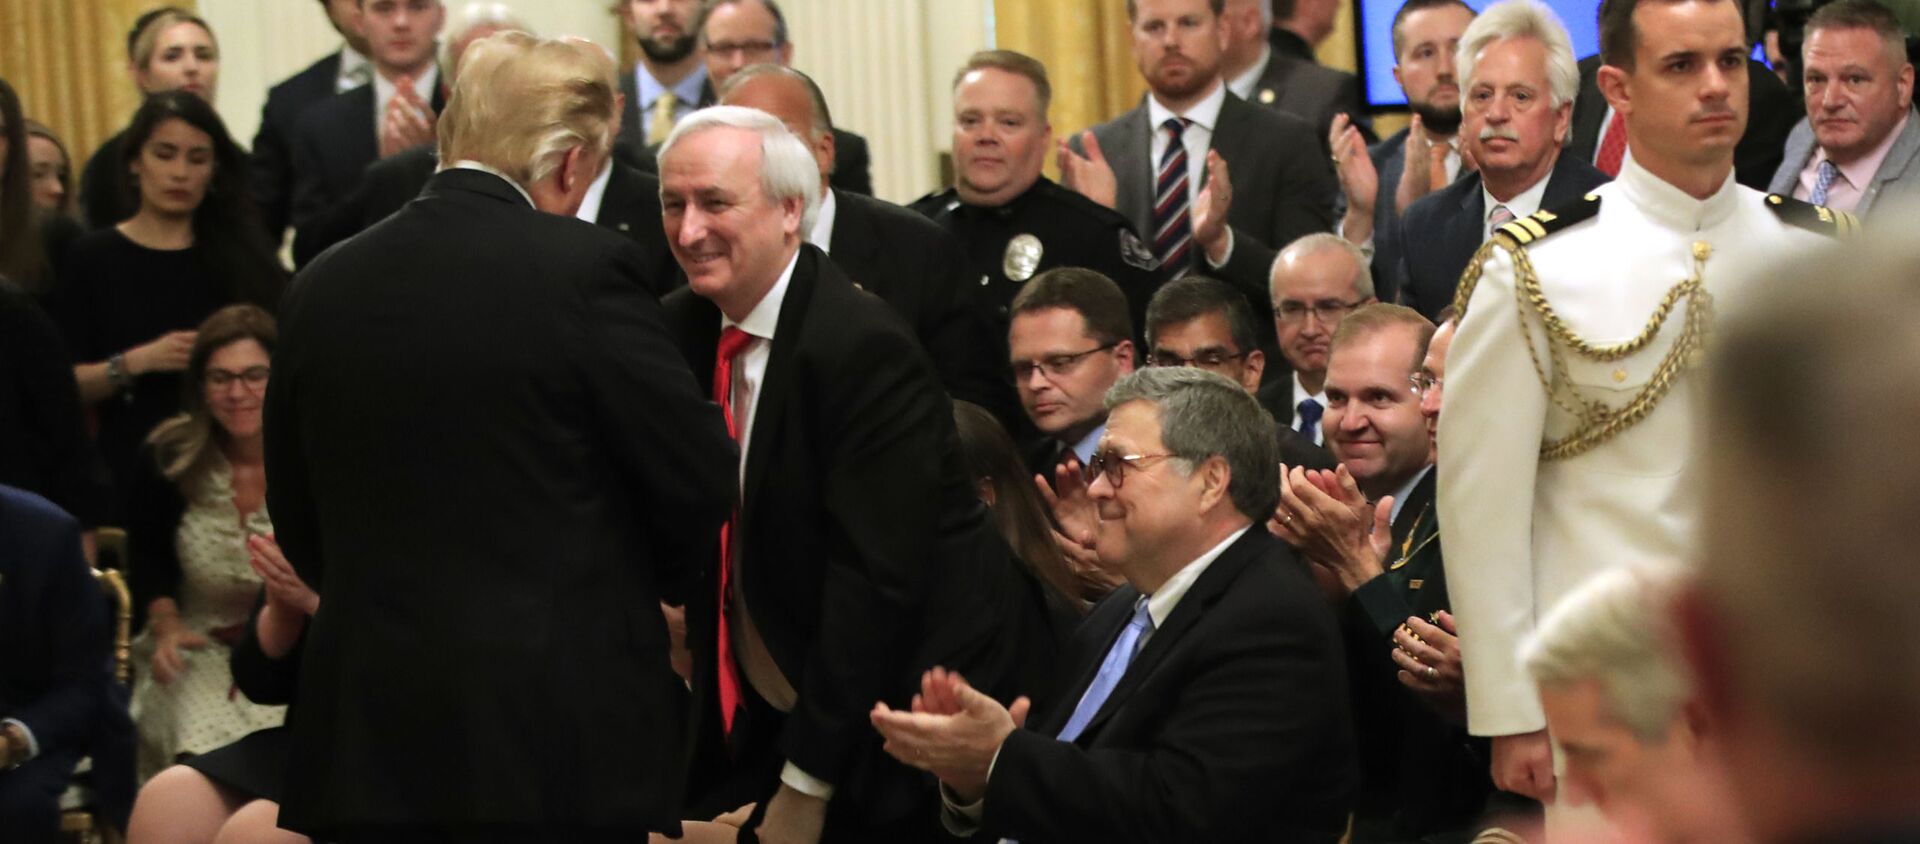 President Donald Trump greets Attorney General William Barr, seated, Deputy Attorney General Jeffrey Rosen, and invited guests during a ceremony awarding the Public Safety Officer Medal of Valor in the East Room of the White House in Washington, Wednesday, May 22, 2019 - Sputnik International, 1920, 11.08.2021